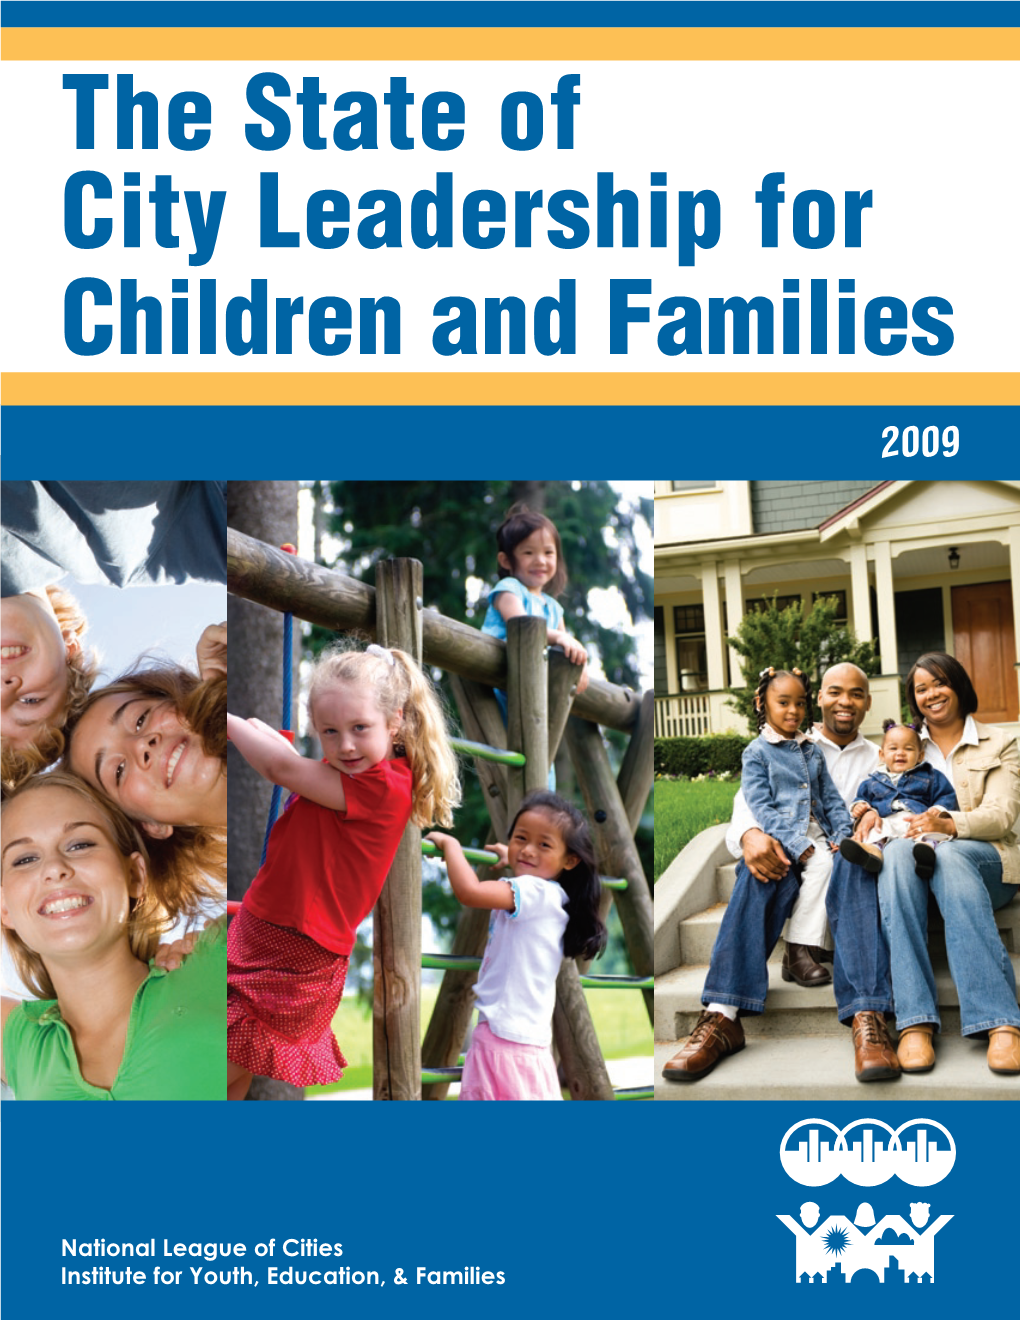 The State of City Leadership for Children and Families